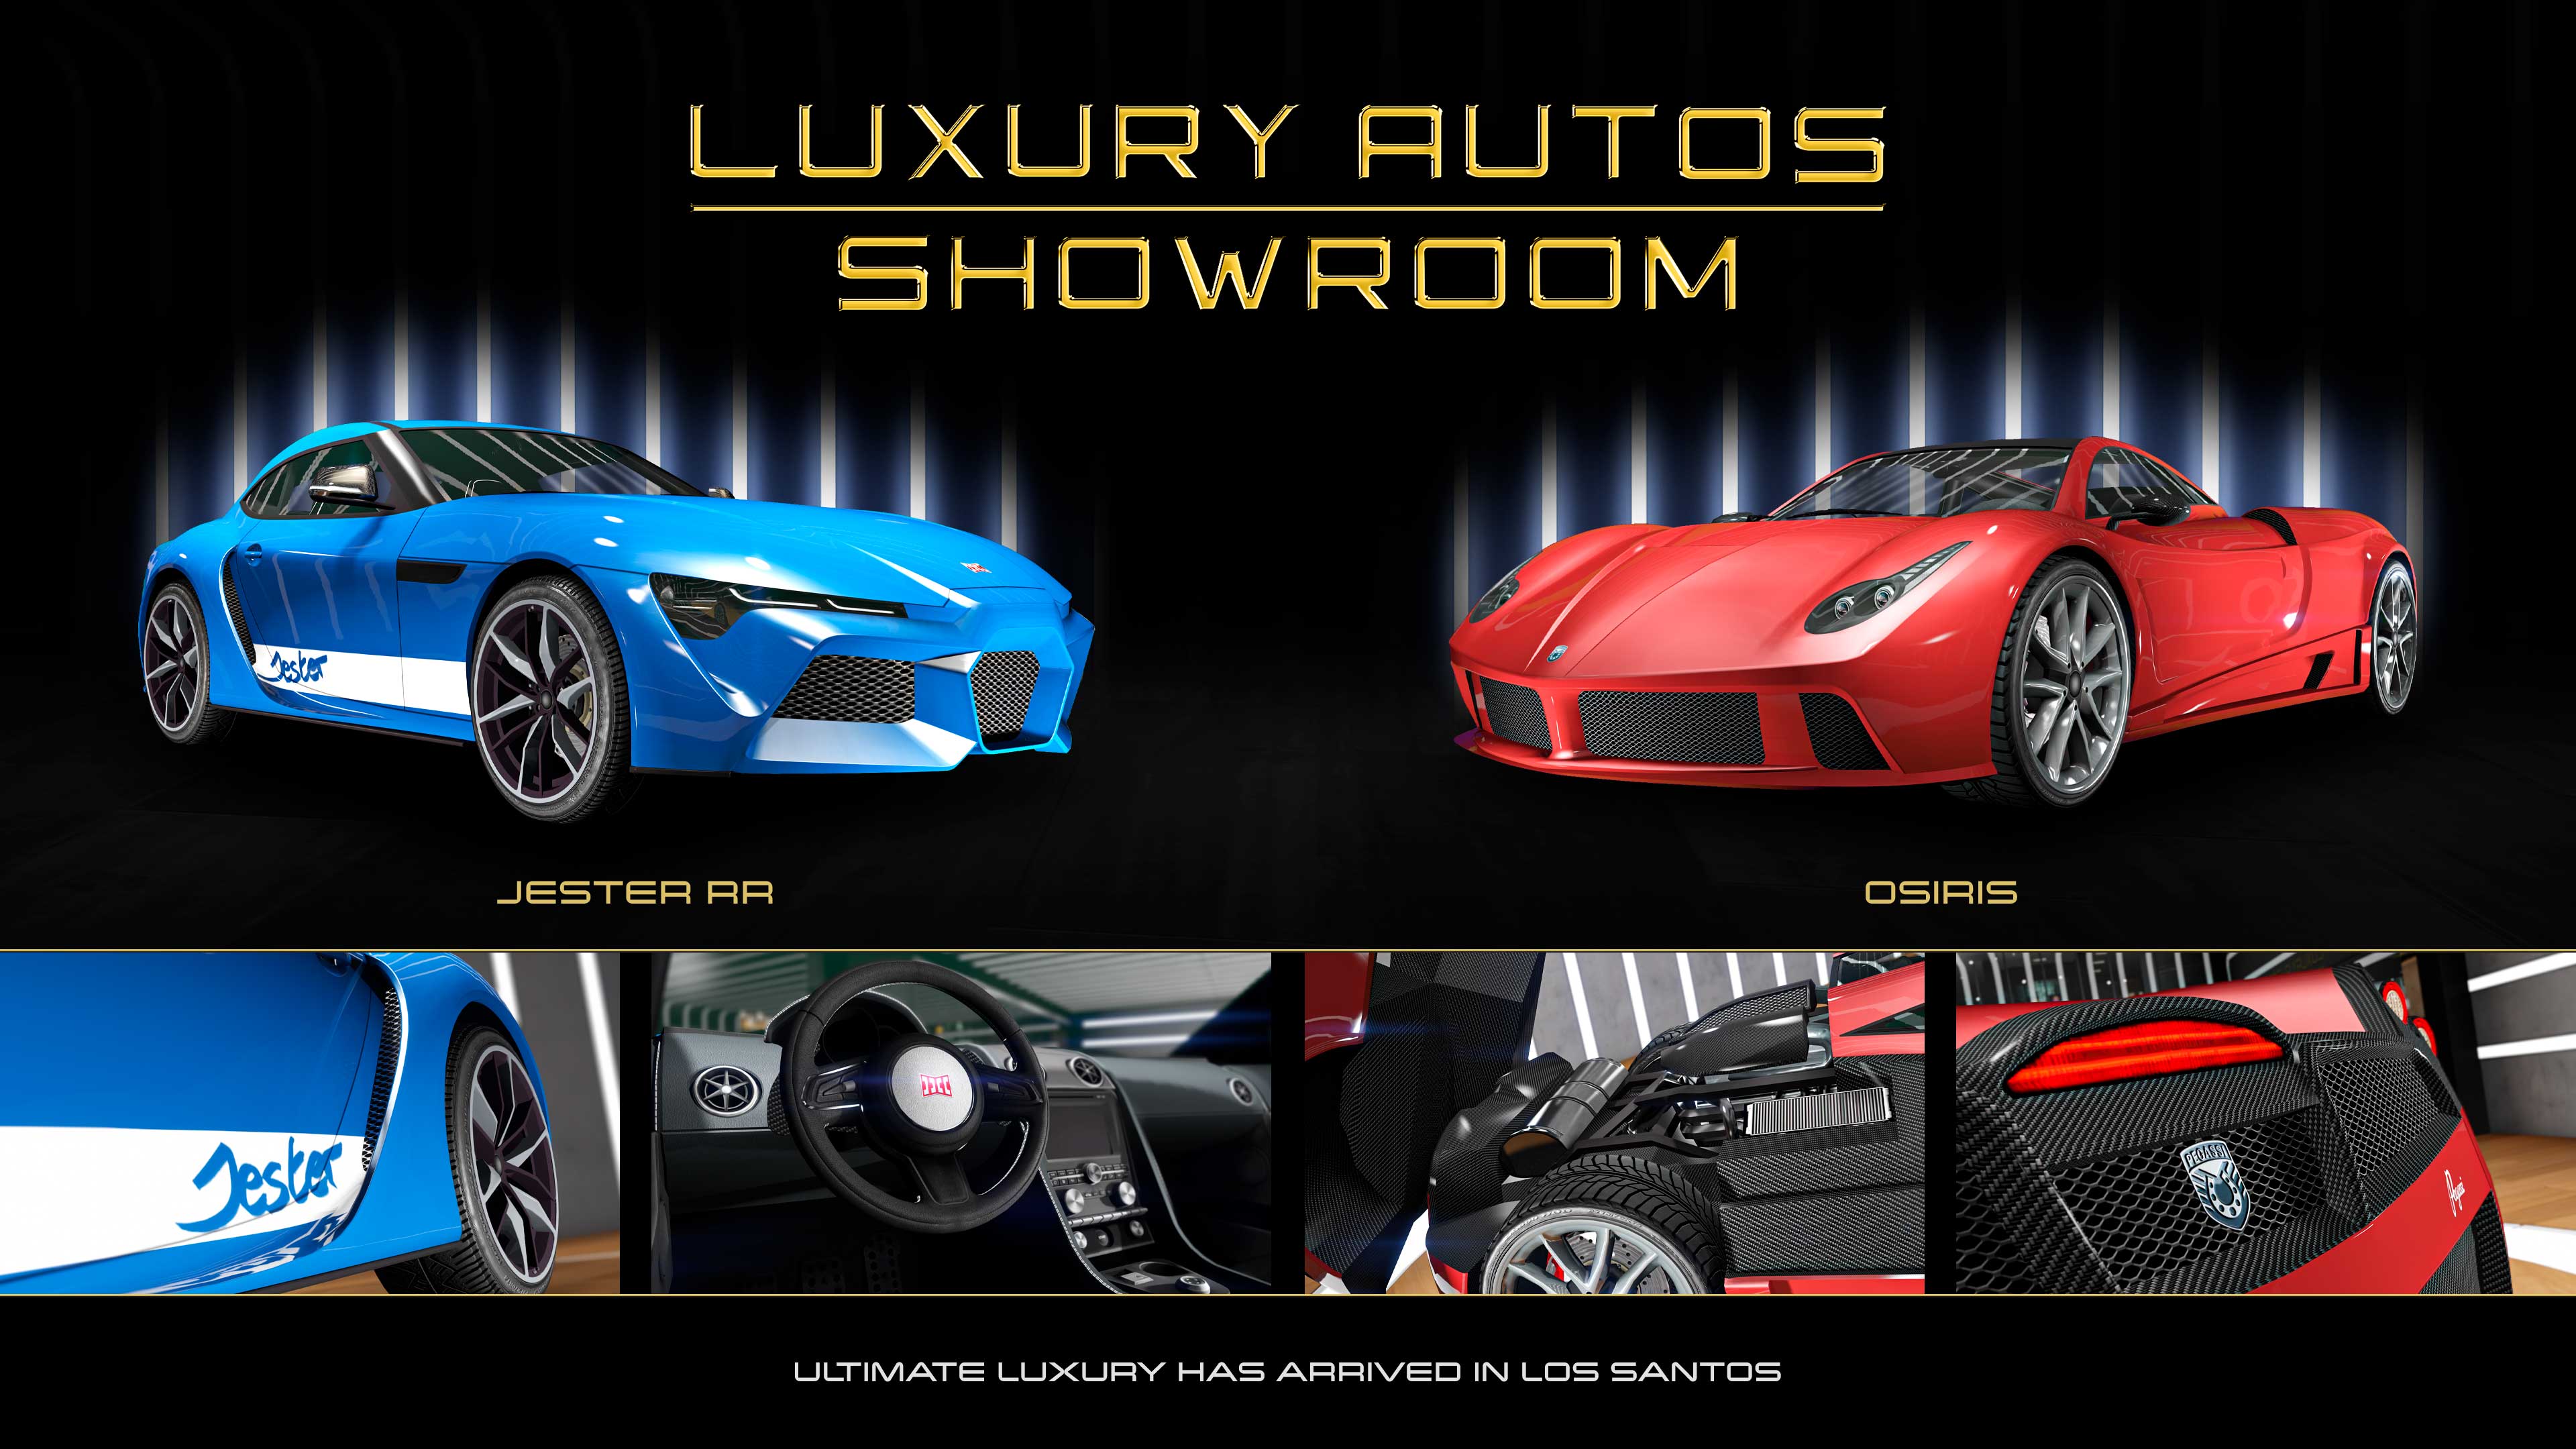 poster dell'autosalone Luxury Autos